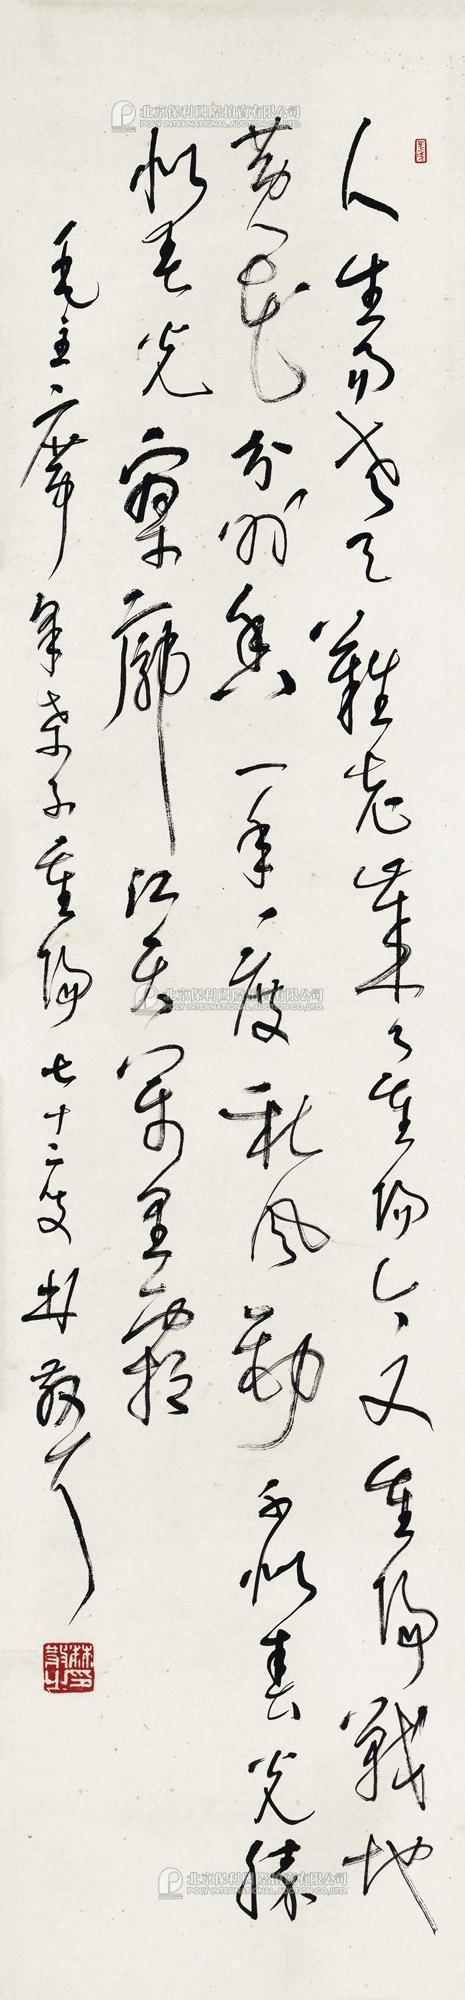 Calligraphic Poem by Chirman MAO in  Curise Script